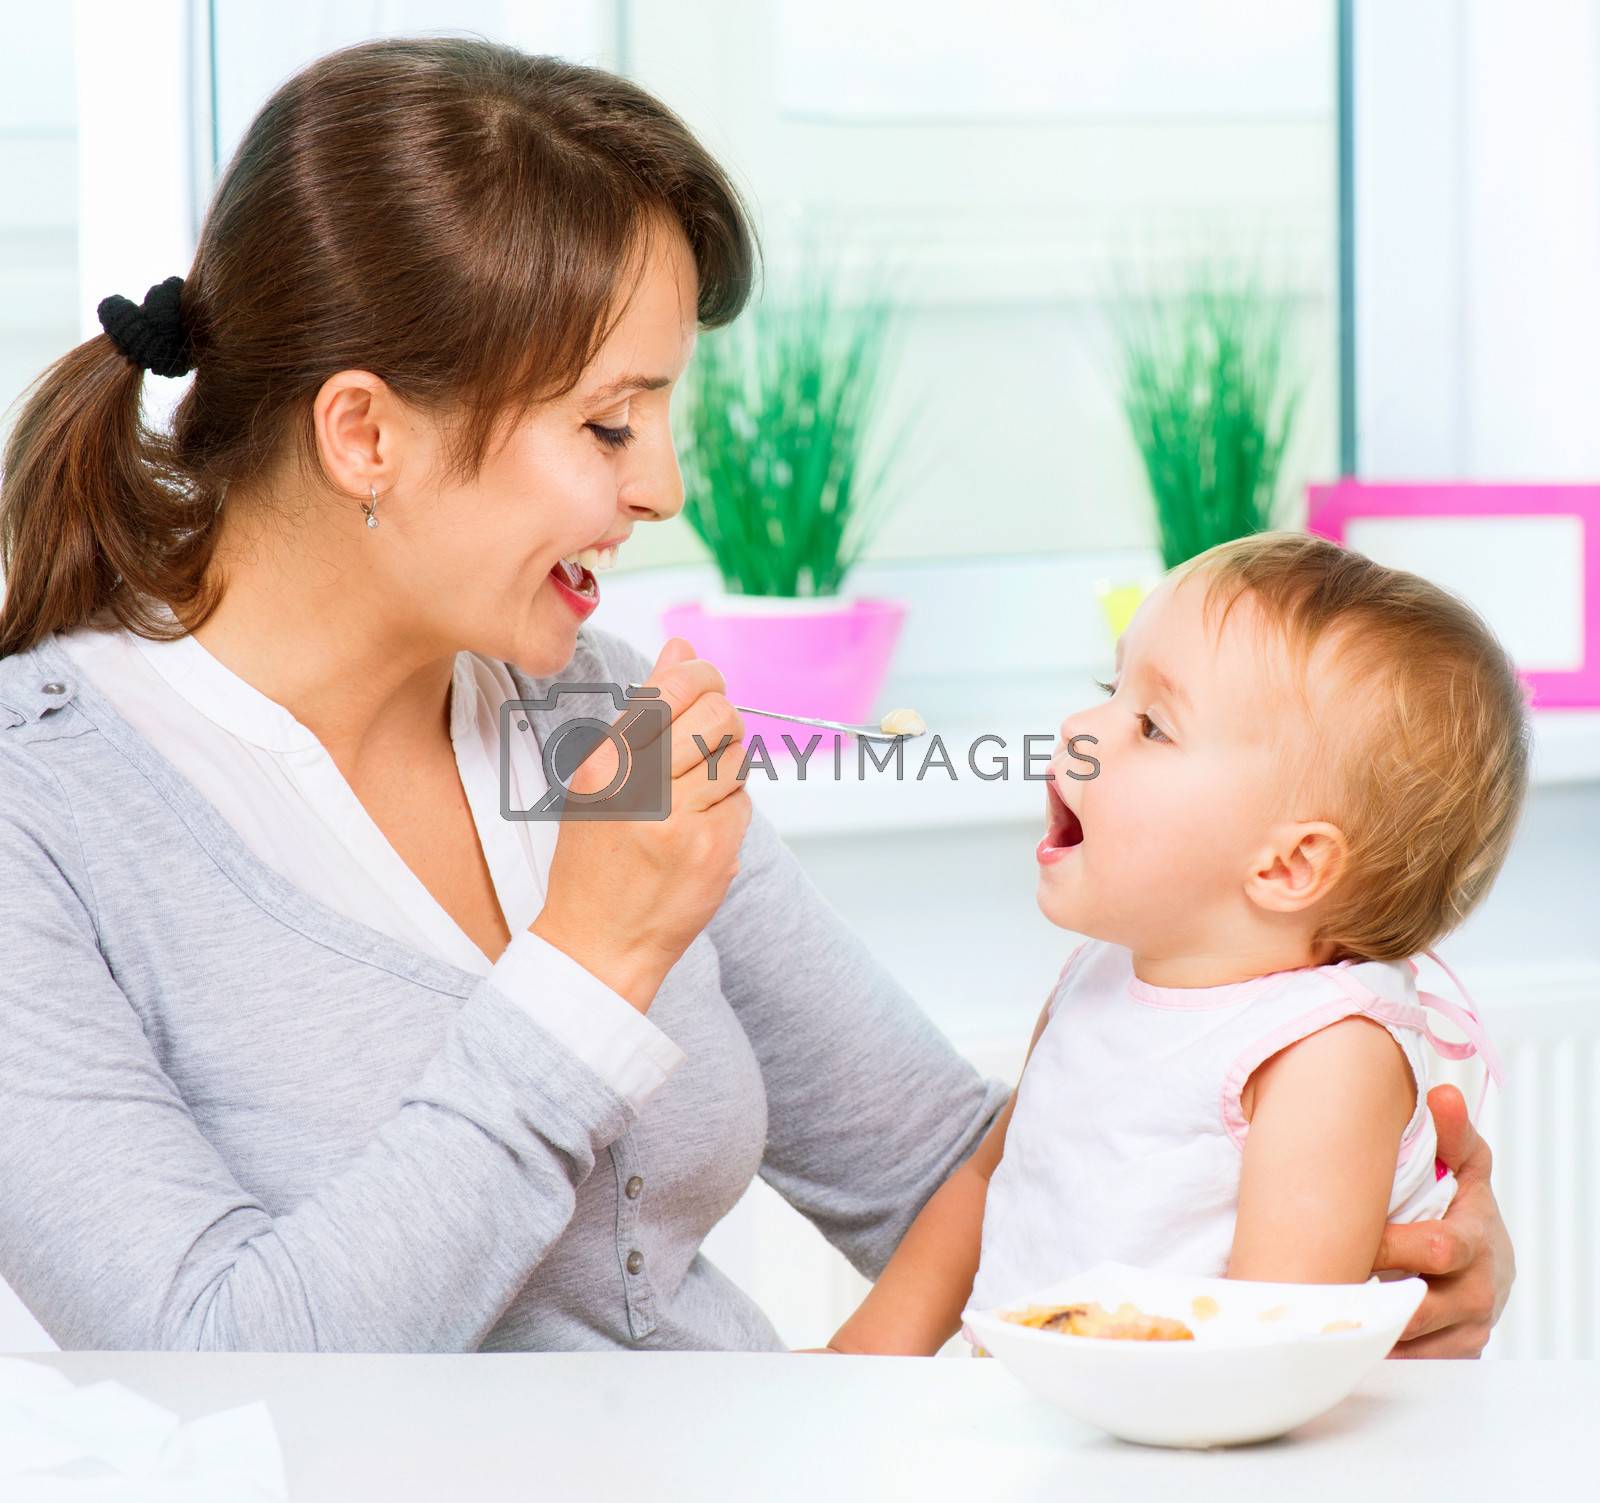 Royalty free image of Mother Feeding Her Baby Girl with a Spoon by SubbotinaA